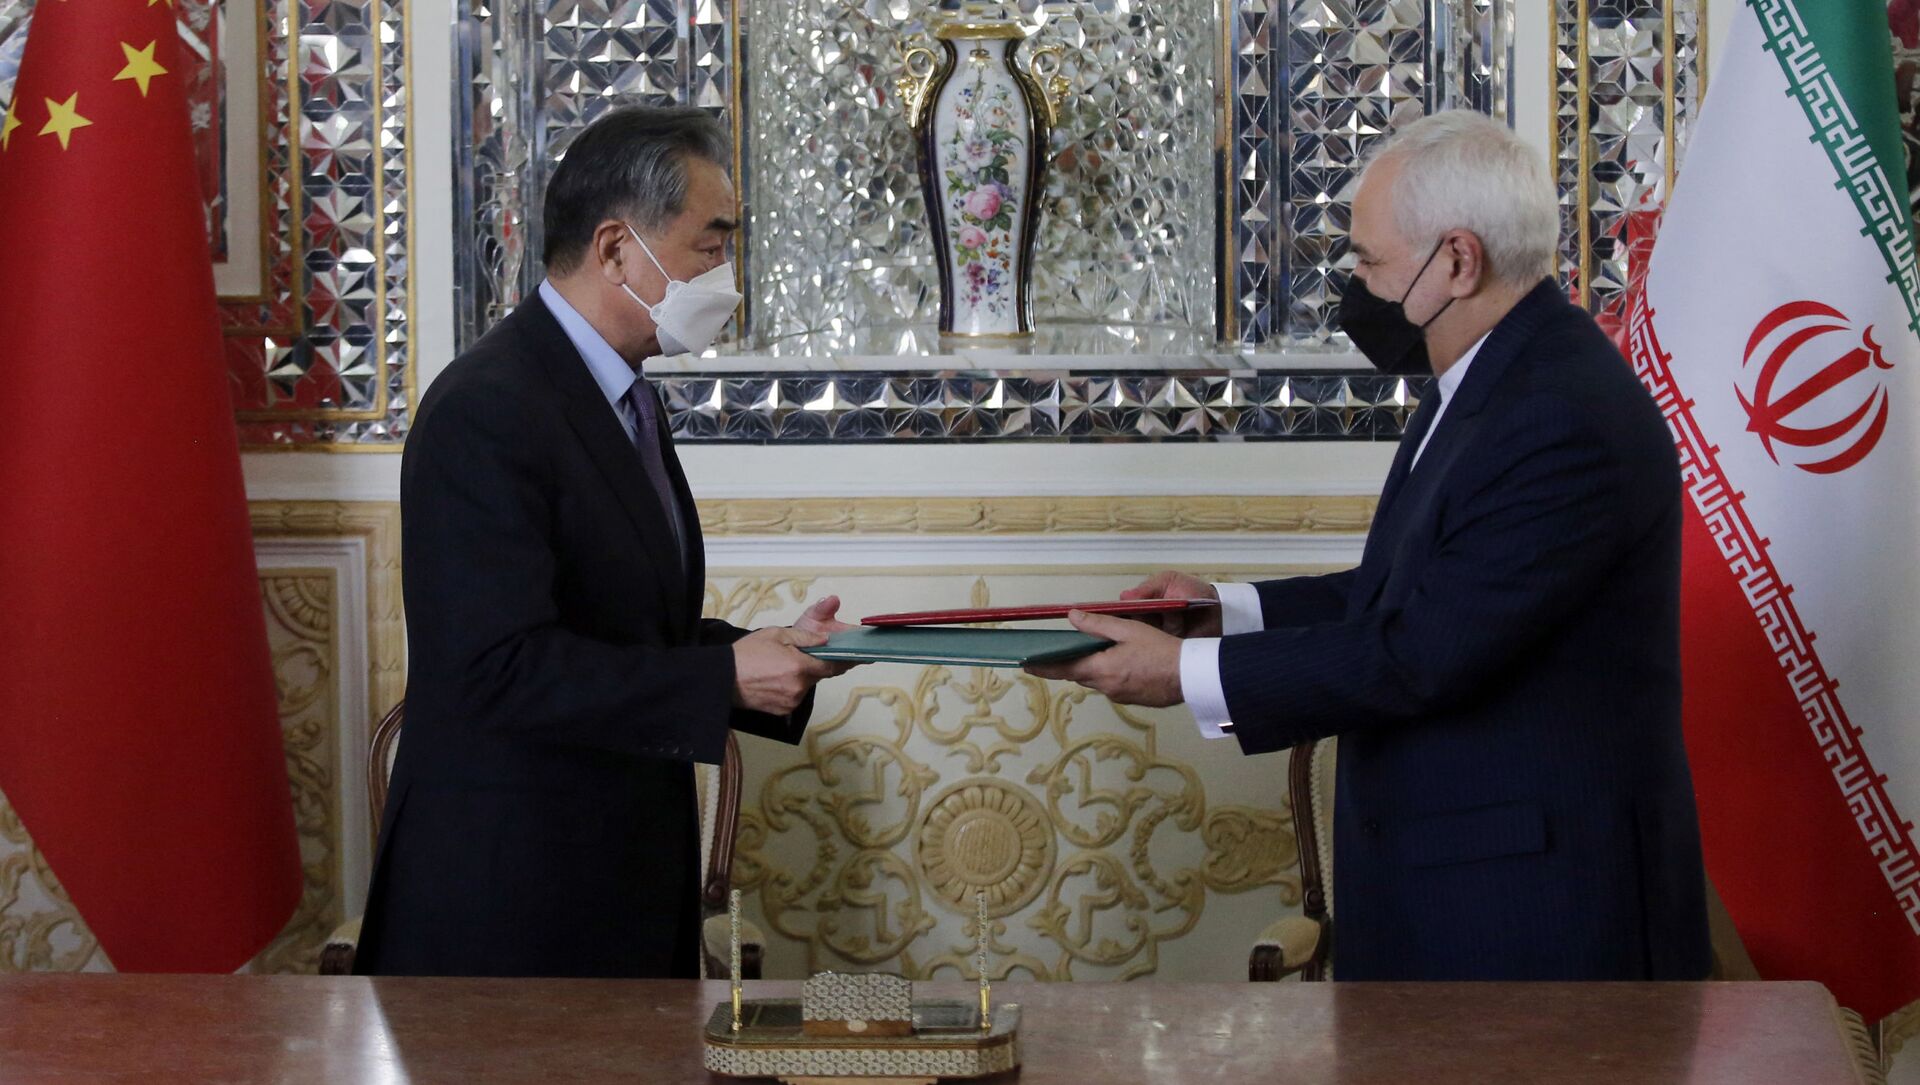 Iranian Foreign Minister Mohammad Javad Zarif (R) and his Chinese counterpart Wang Yi, are pictured during the signing of an agreement in the capital Tehran, on March 27, 2021. - Sputnik International, 1920, 05.04.2021